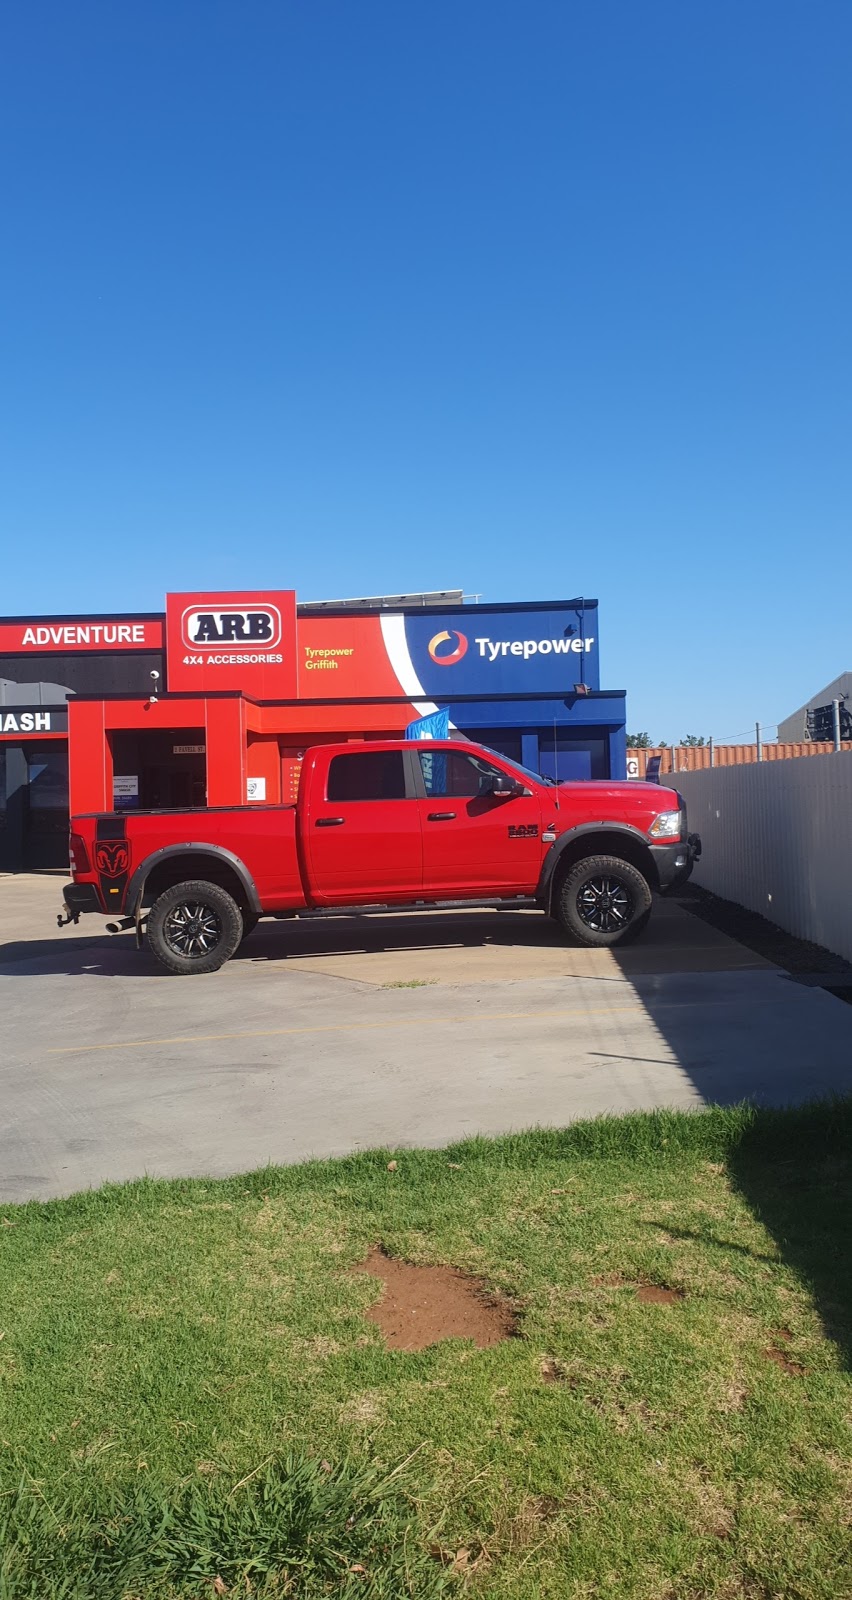 Tyrepower Griffith | car repair | 2 Favell St, Griffith NSW 2680, Australia | 0269641010 OR +61 2 6964 1010